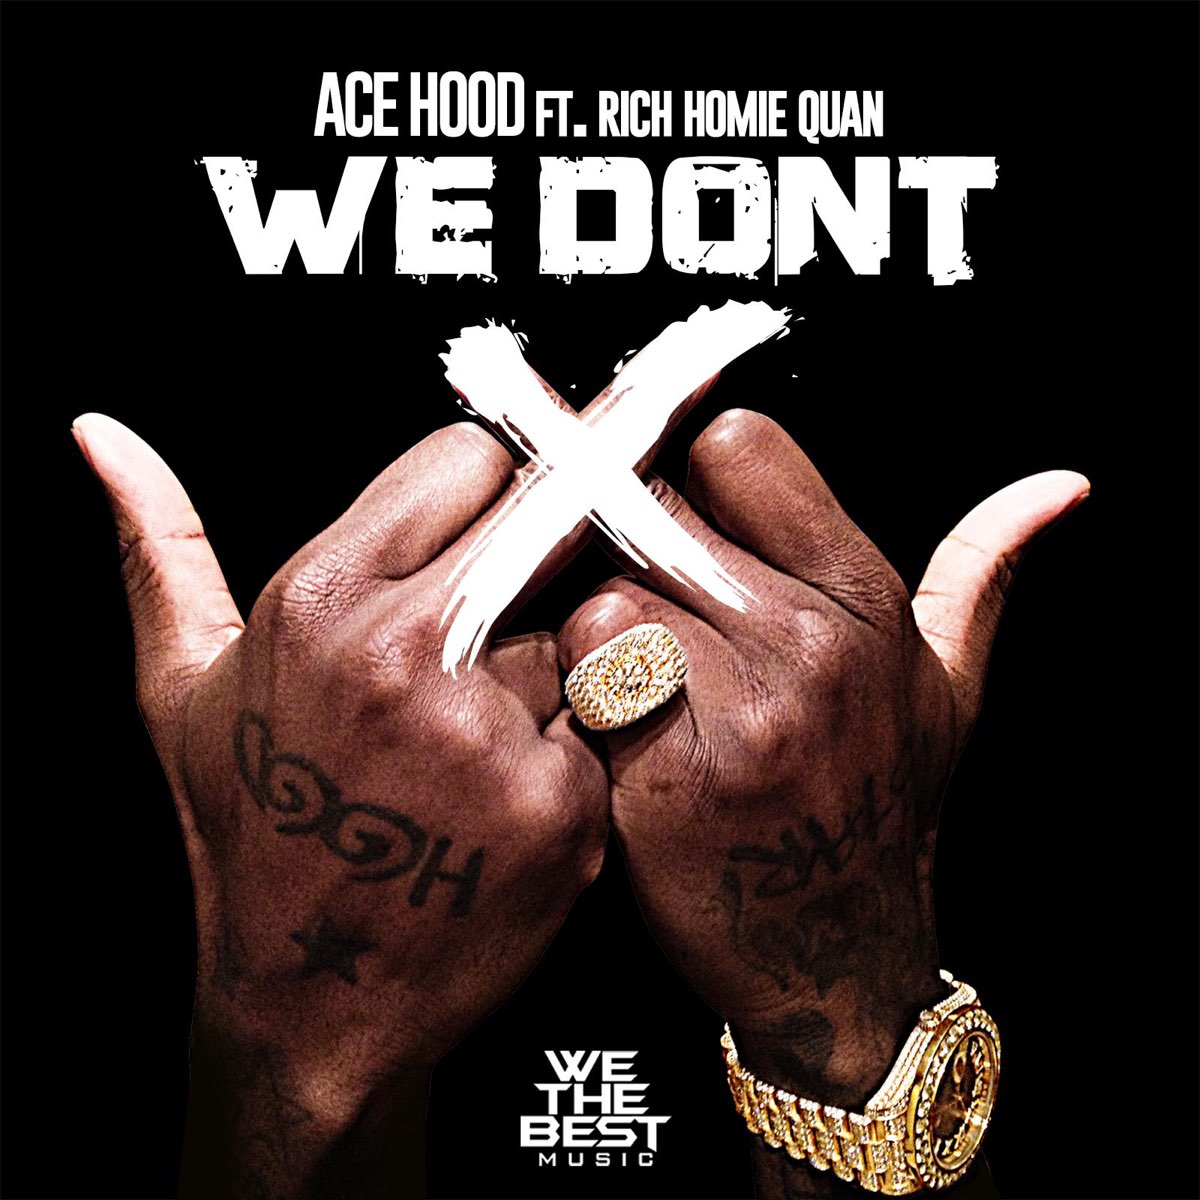 We Don't (feat. Rich Homie Quan) - Single by Ace Hood on iTunes